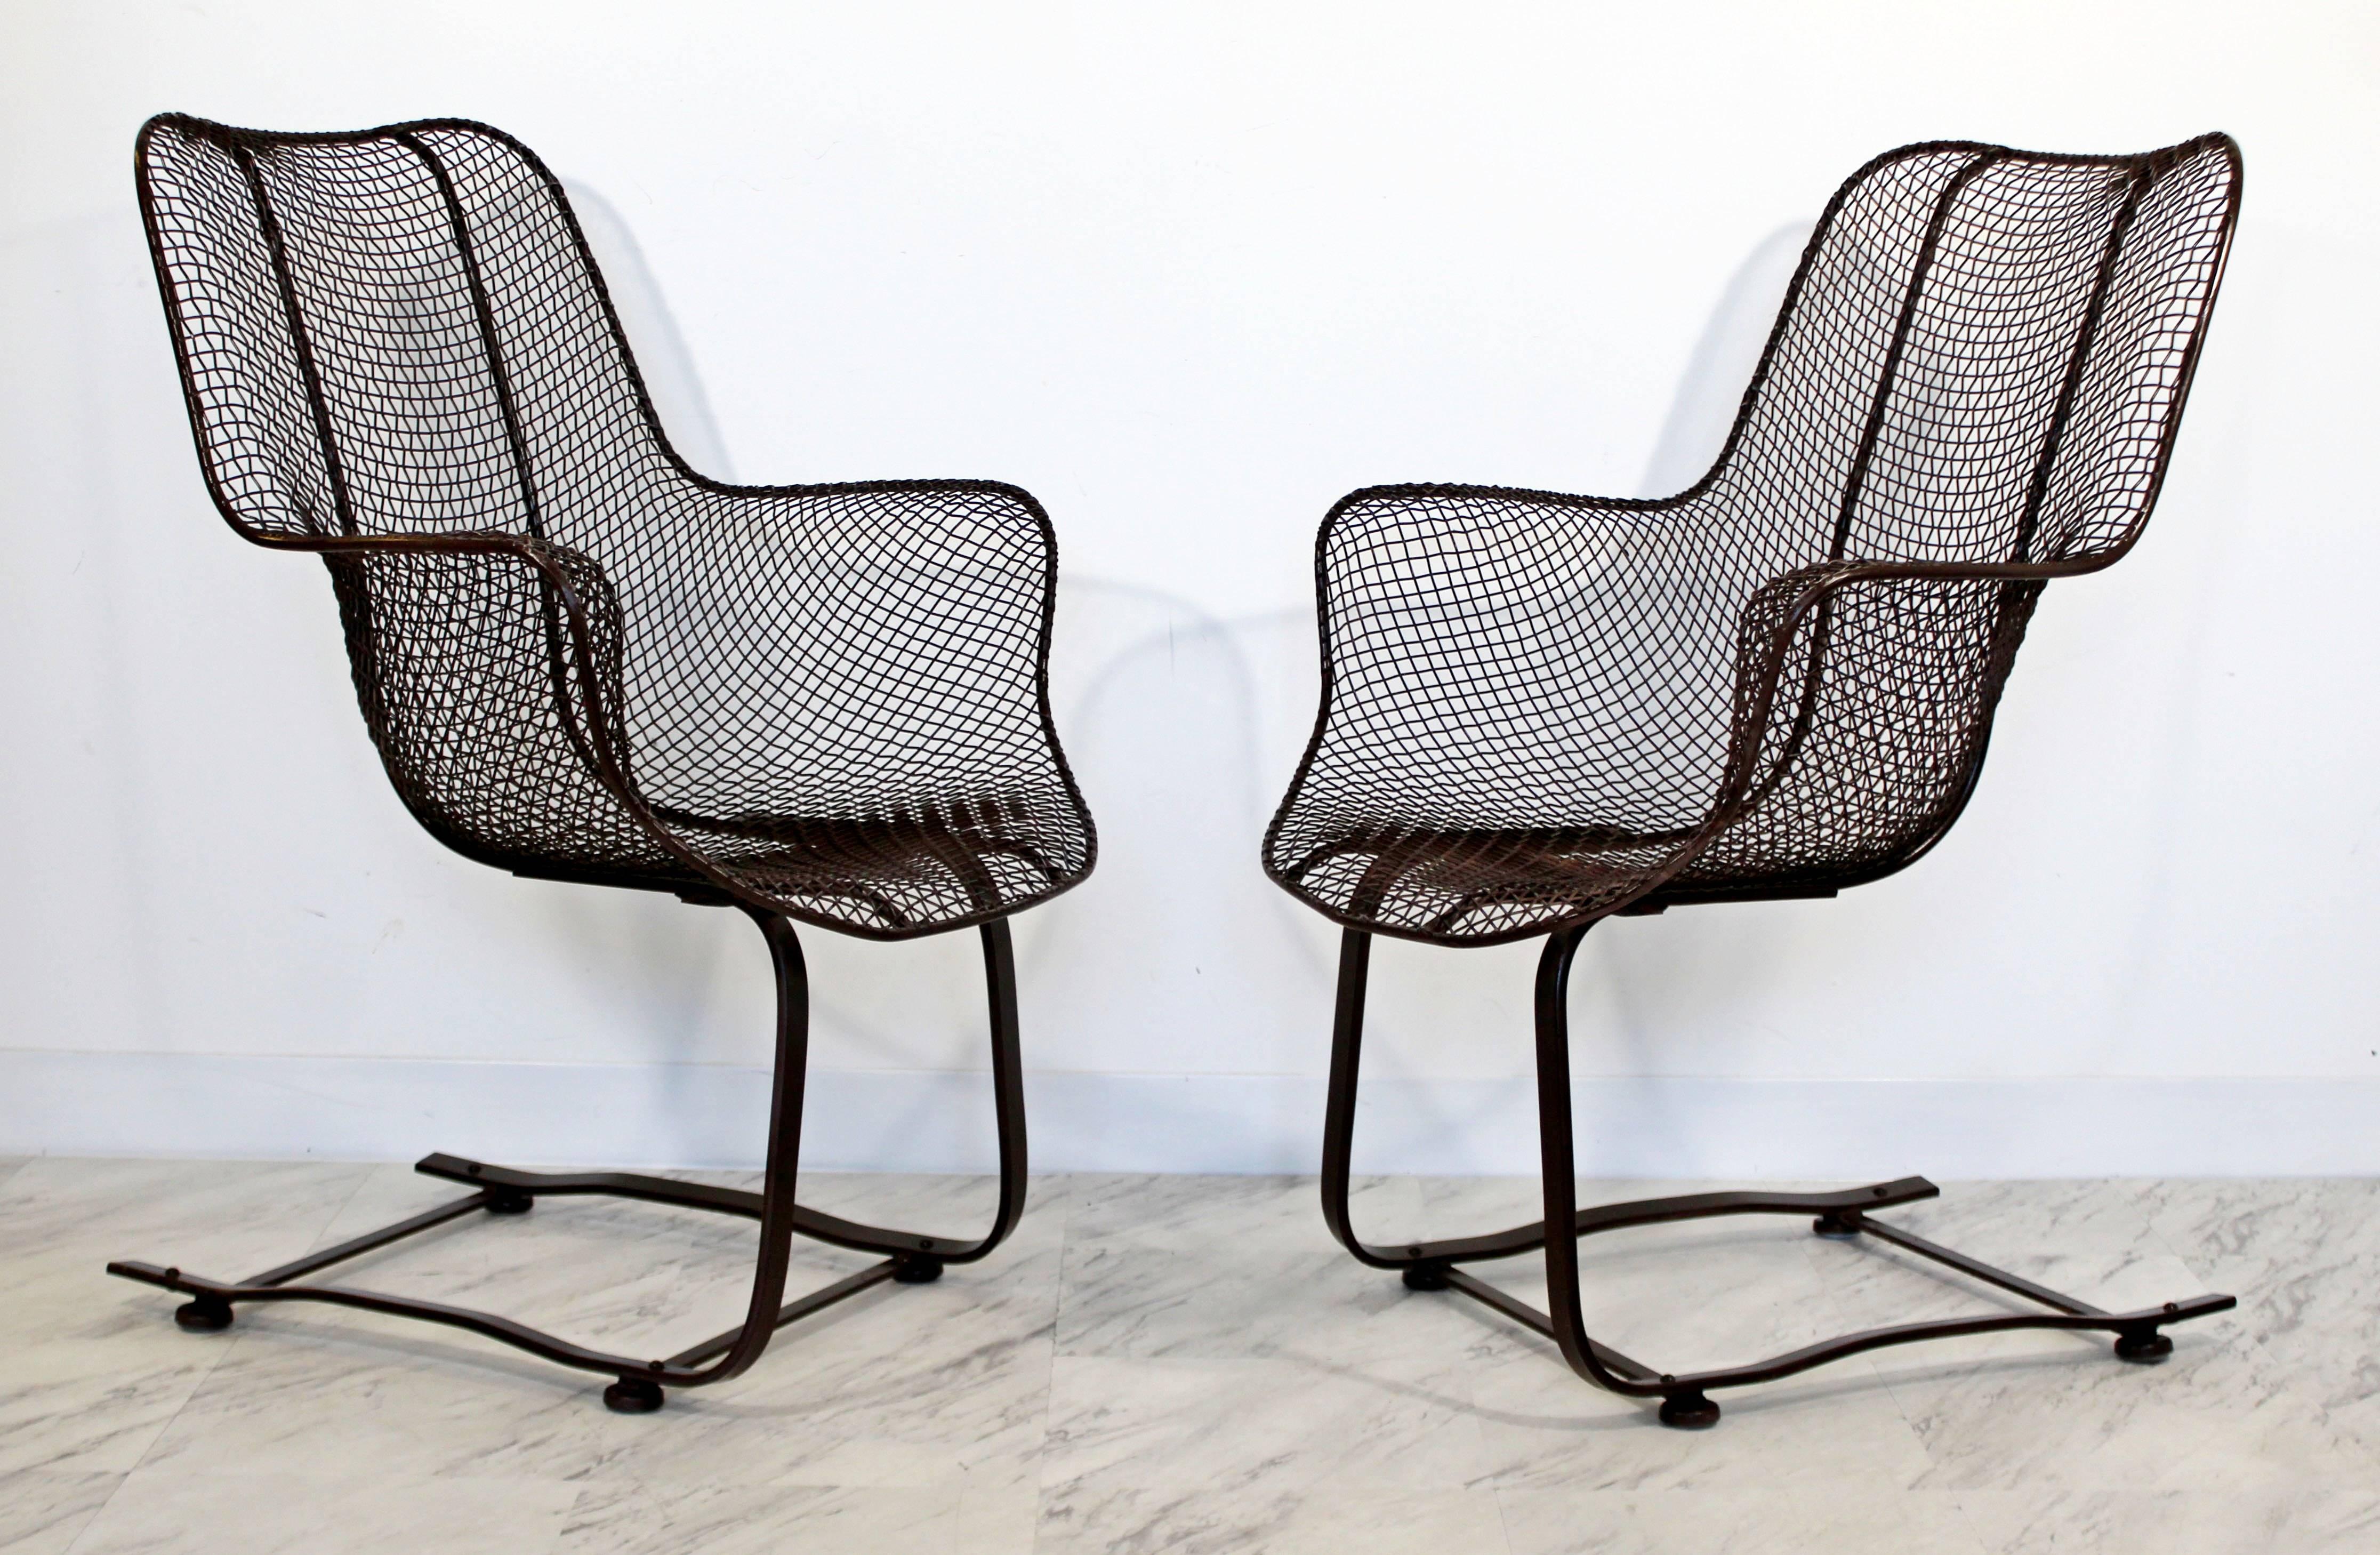 For your consideration is a brilliant pair of brown, rocker lounge chairs, by Woodard Sculptura, circa the 1970s. In excellent condition. The dimensions are 27" Sq x 35" H x 14" S.H.